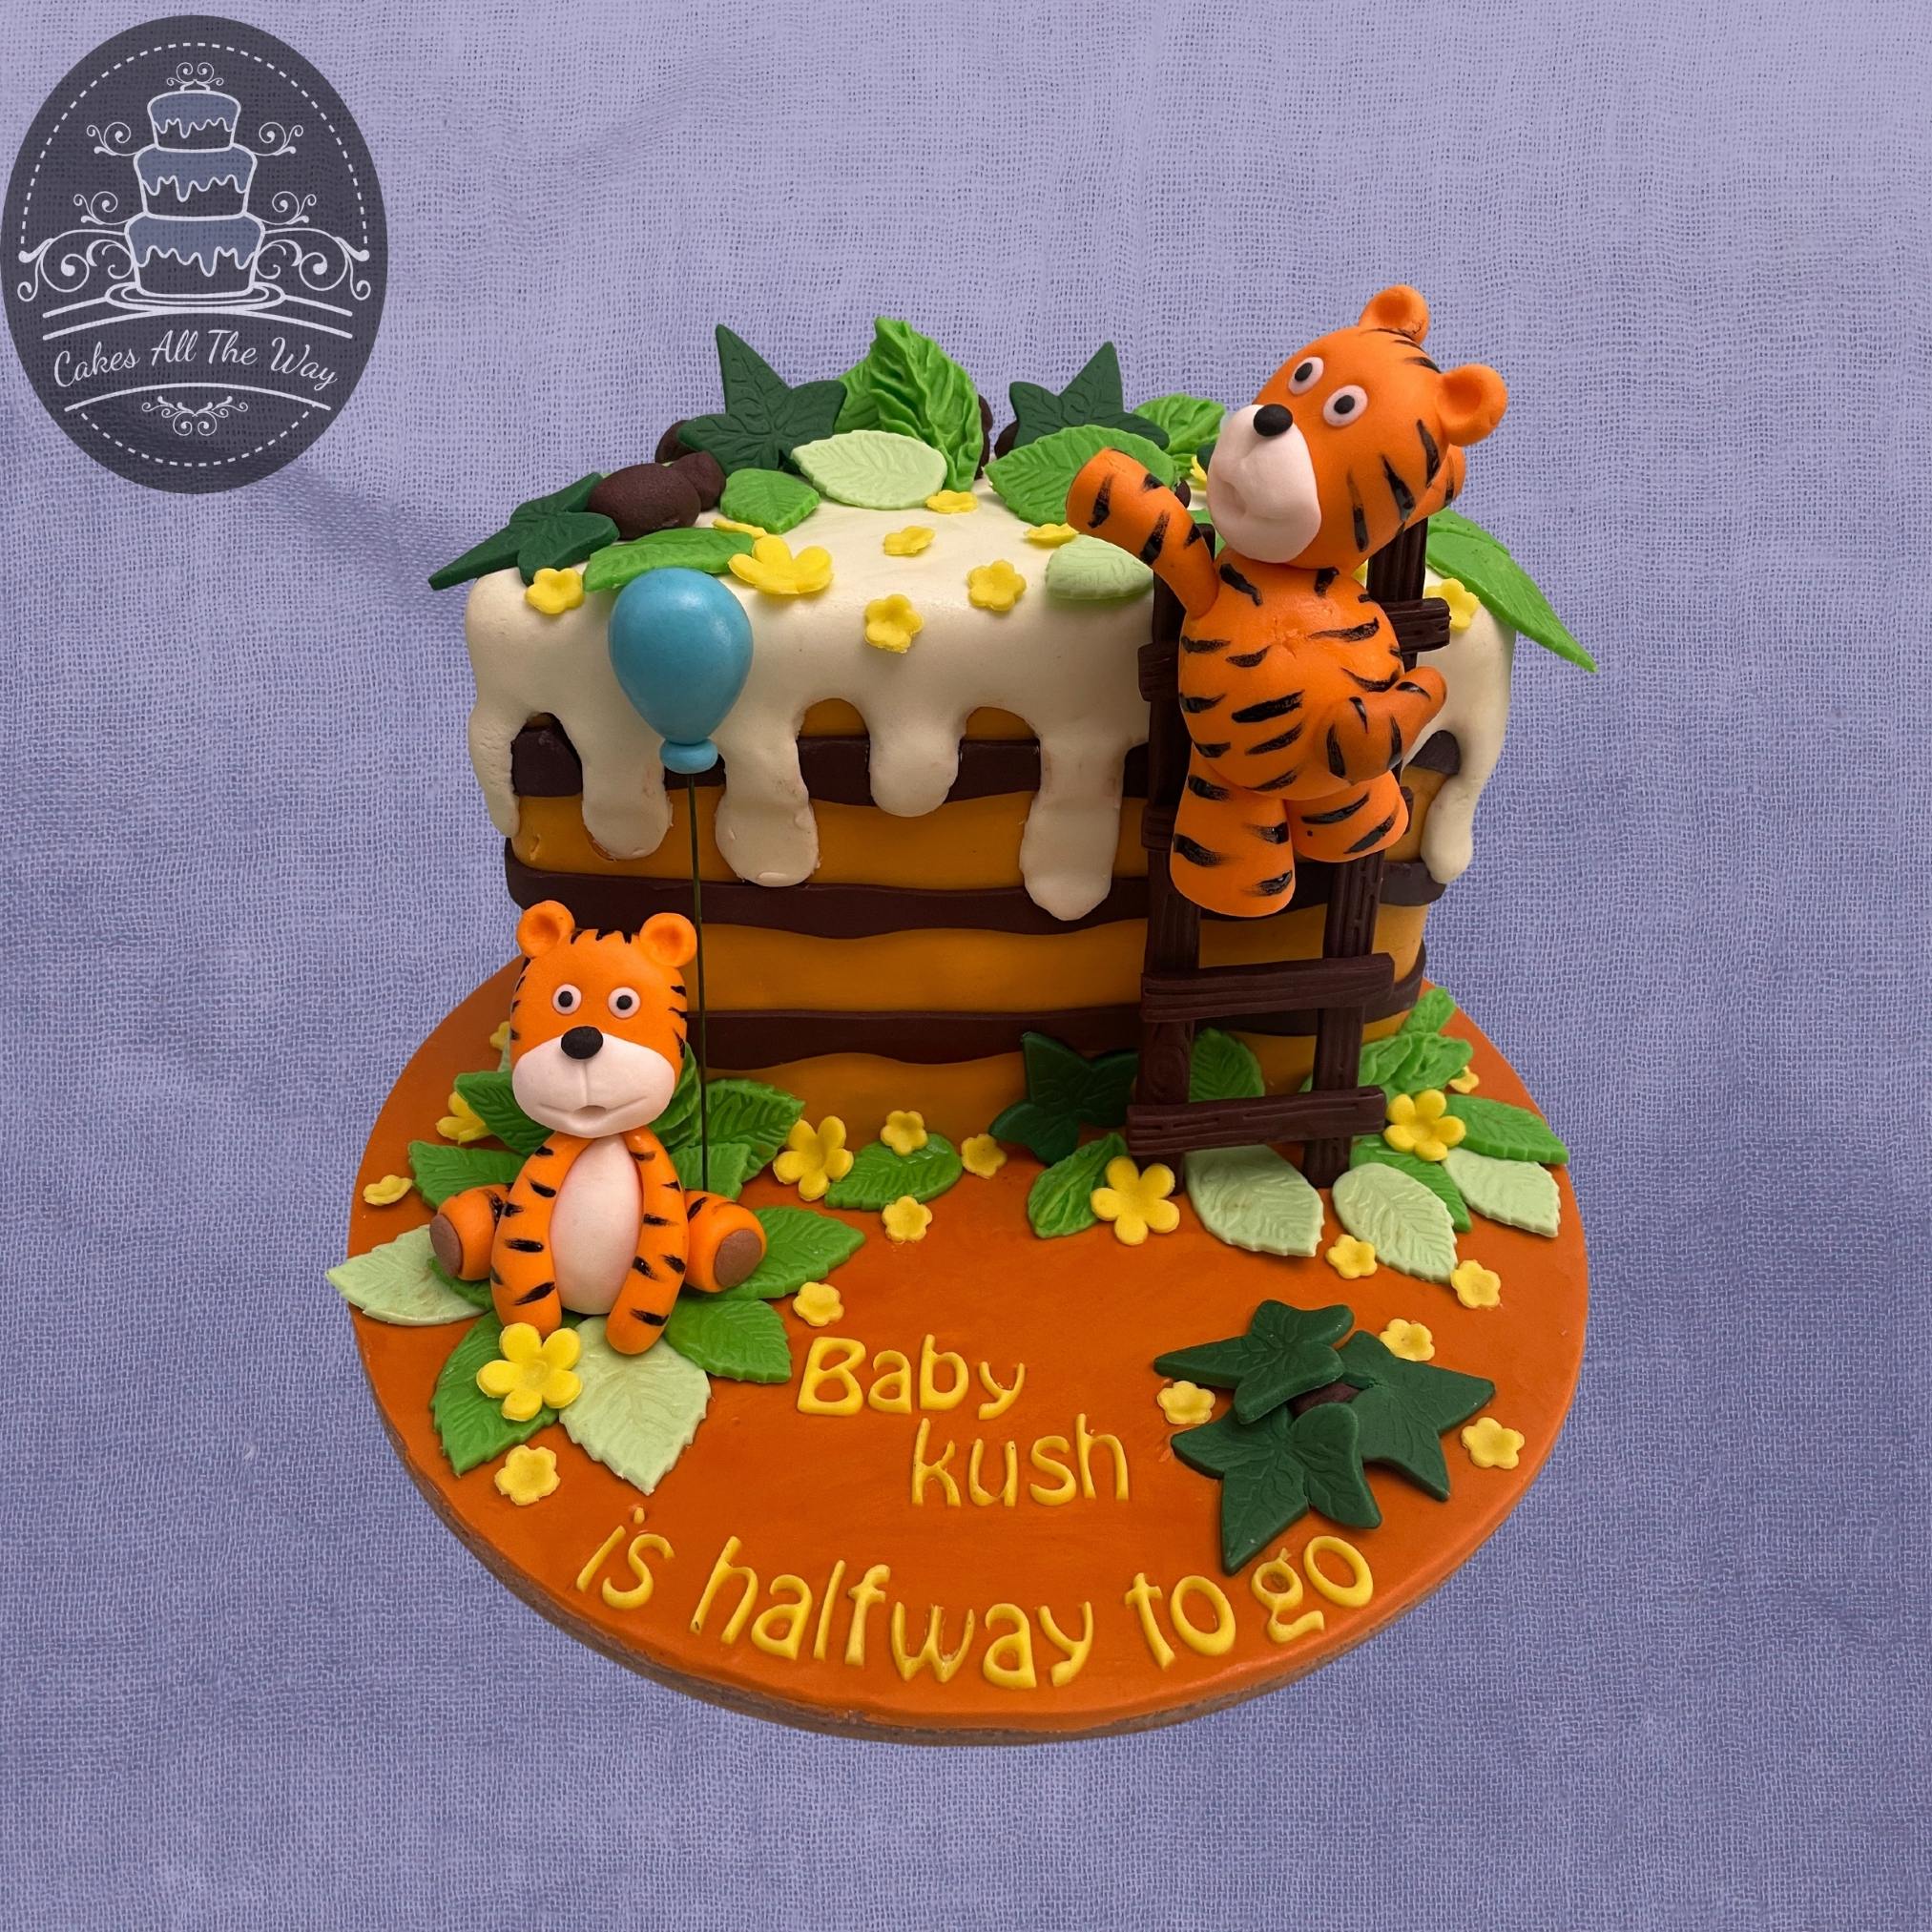 Tiger Cub Cake » Once Upon A Cake